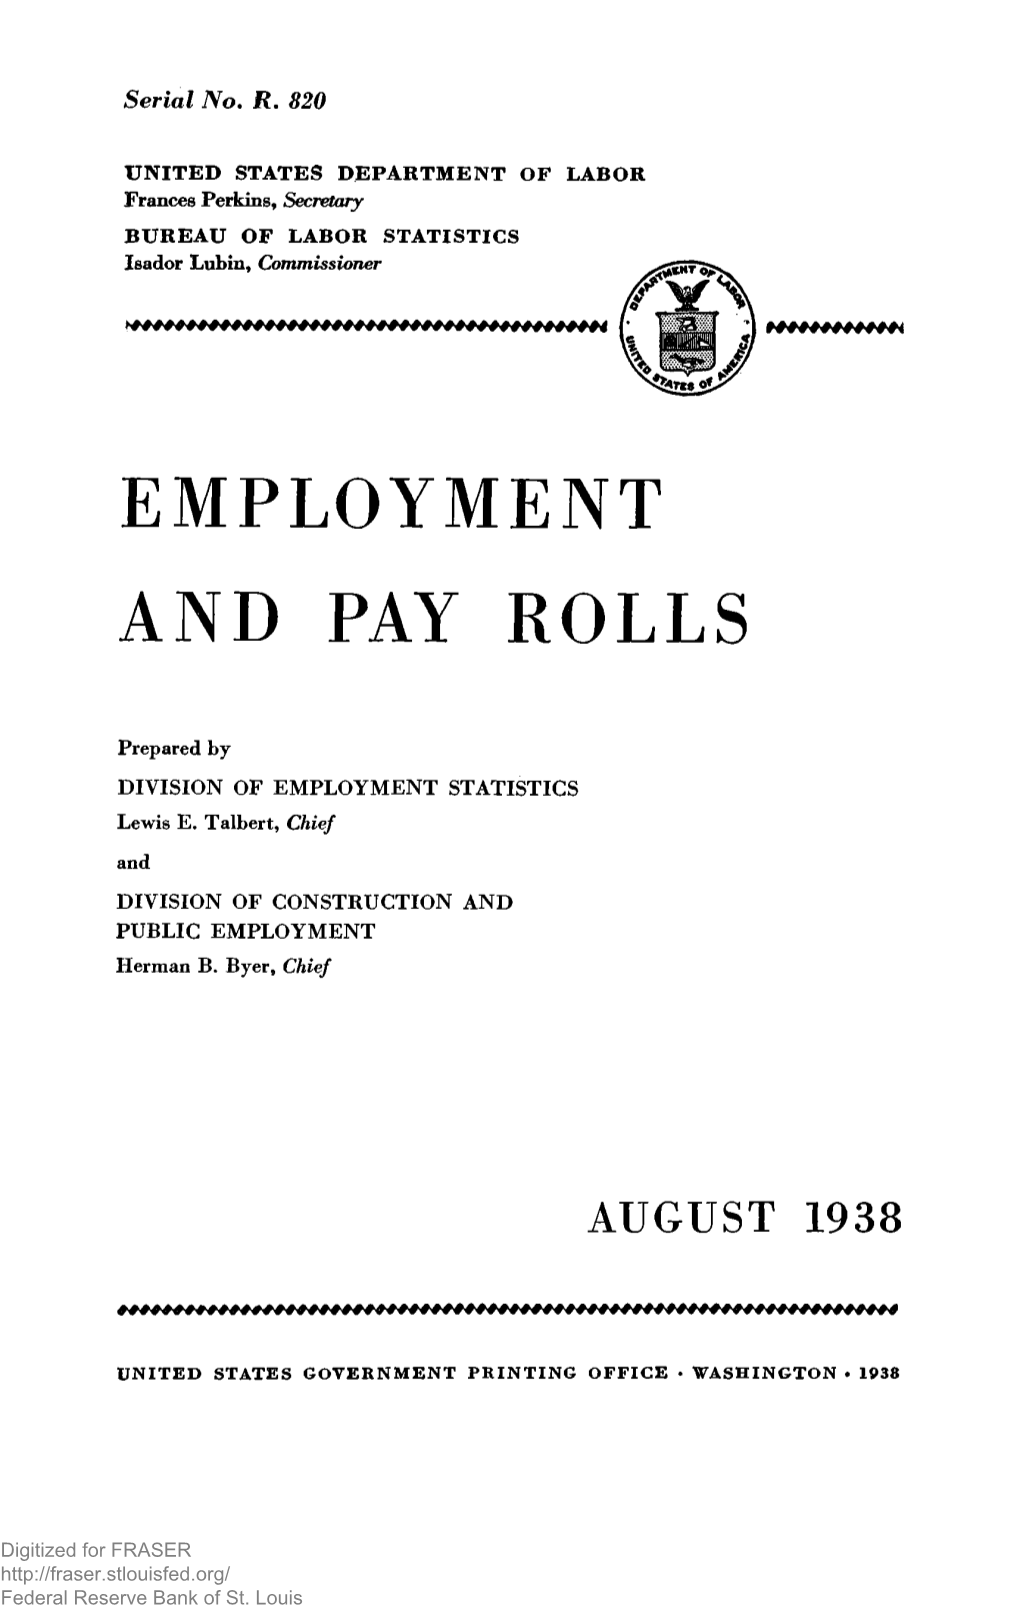 Employment and Pay Rolls August 1938